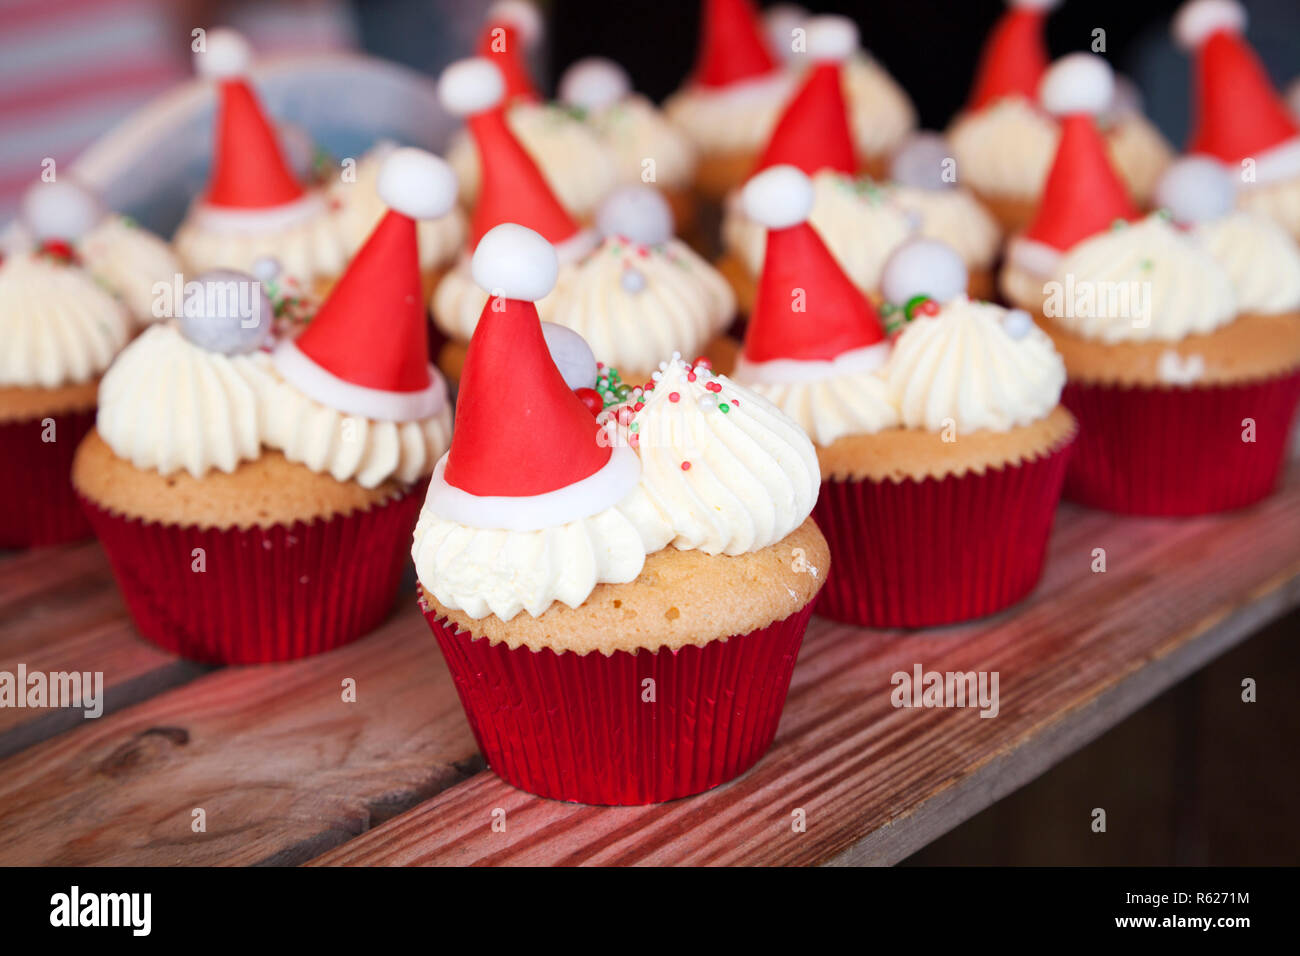 Cup cakes decorated with cream, iced Santa hats and sprinkles Stock Photo